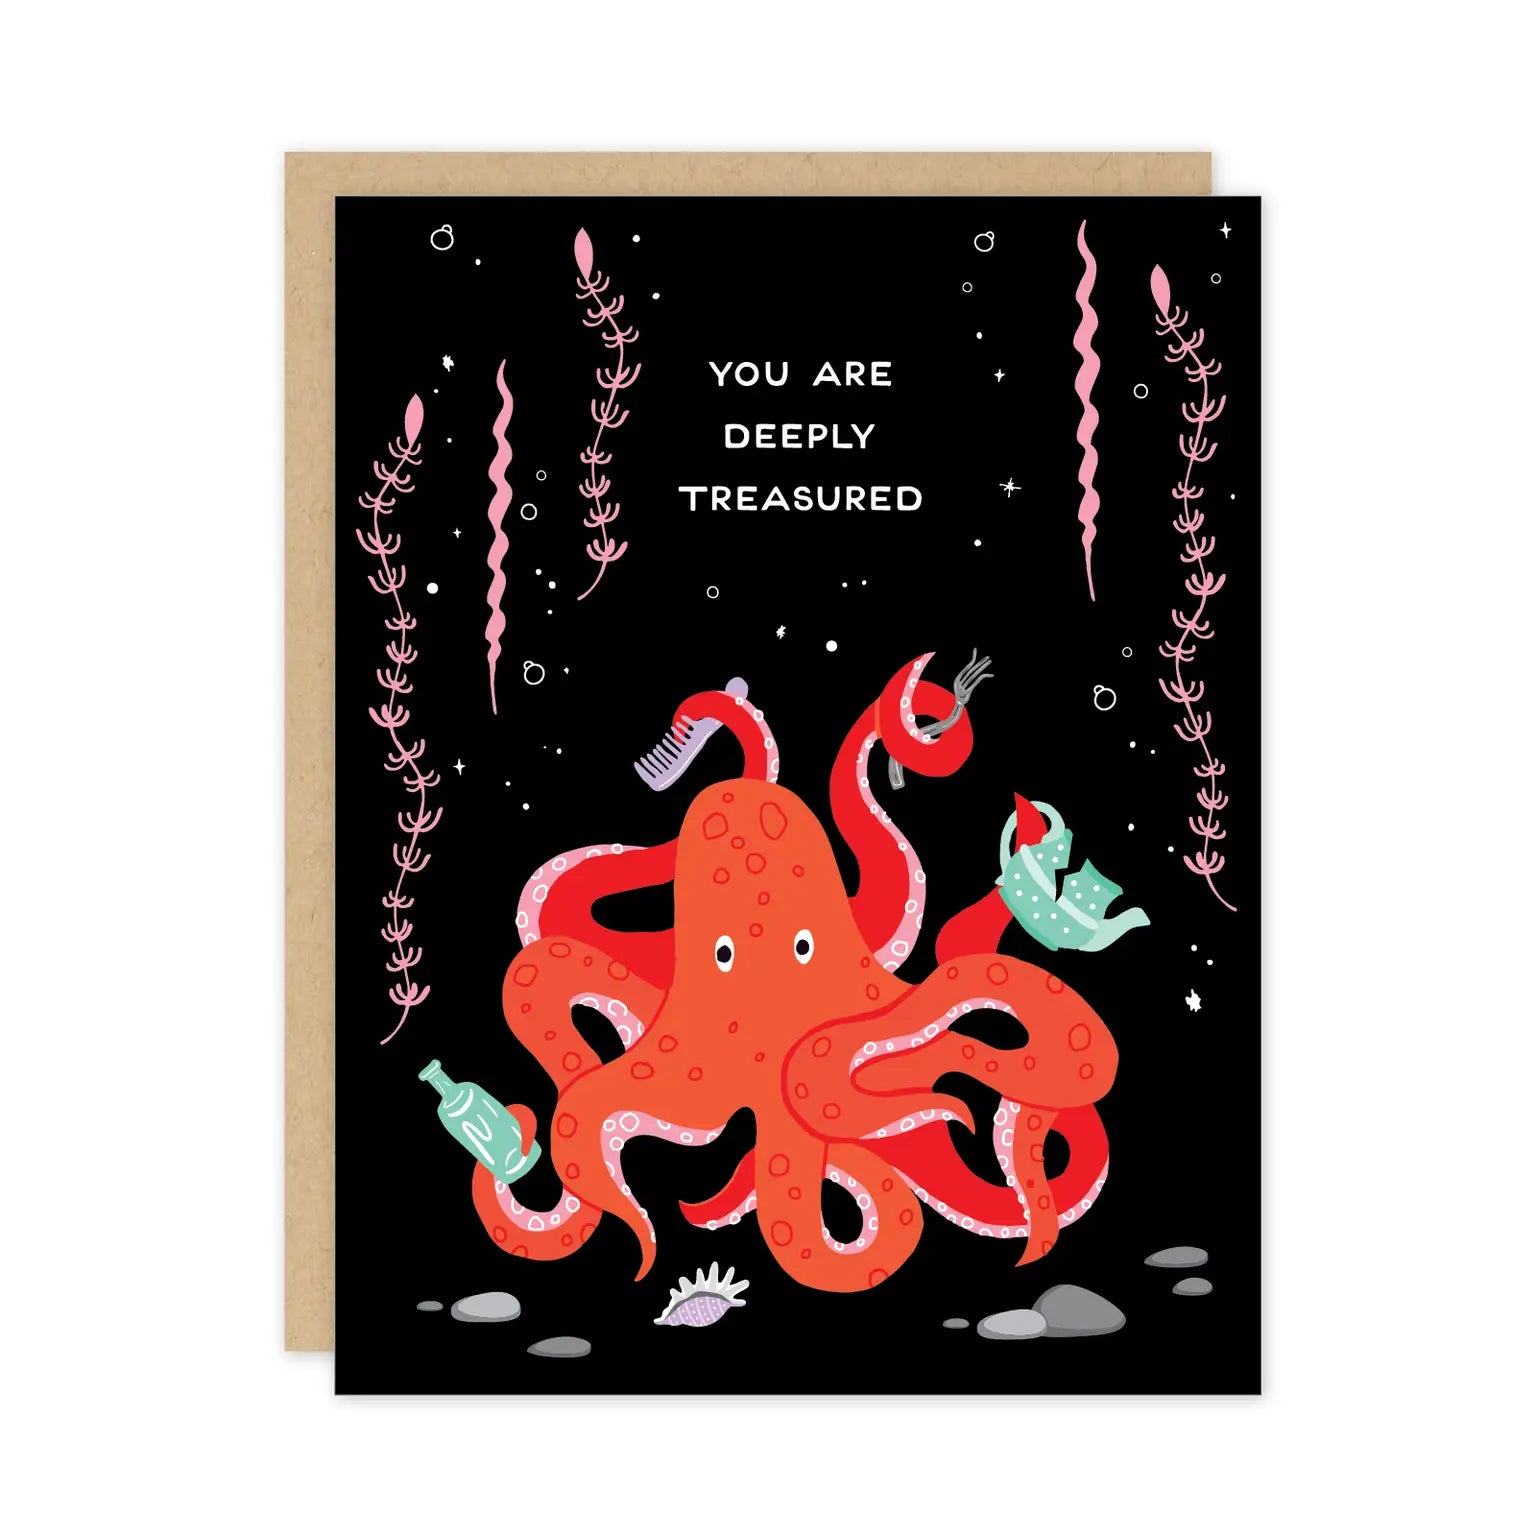 Black card with orange octopus illustration. Octopus is holding a comb, bottle, fork, and teapot. White text reads "you are deeply treasured." Card is white inside. 